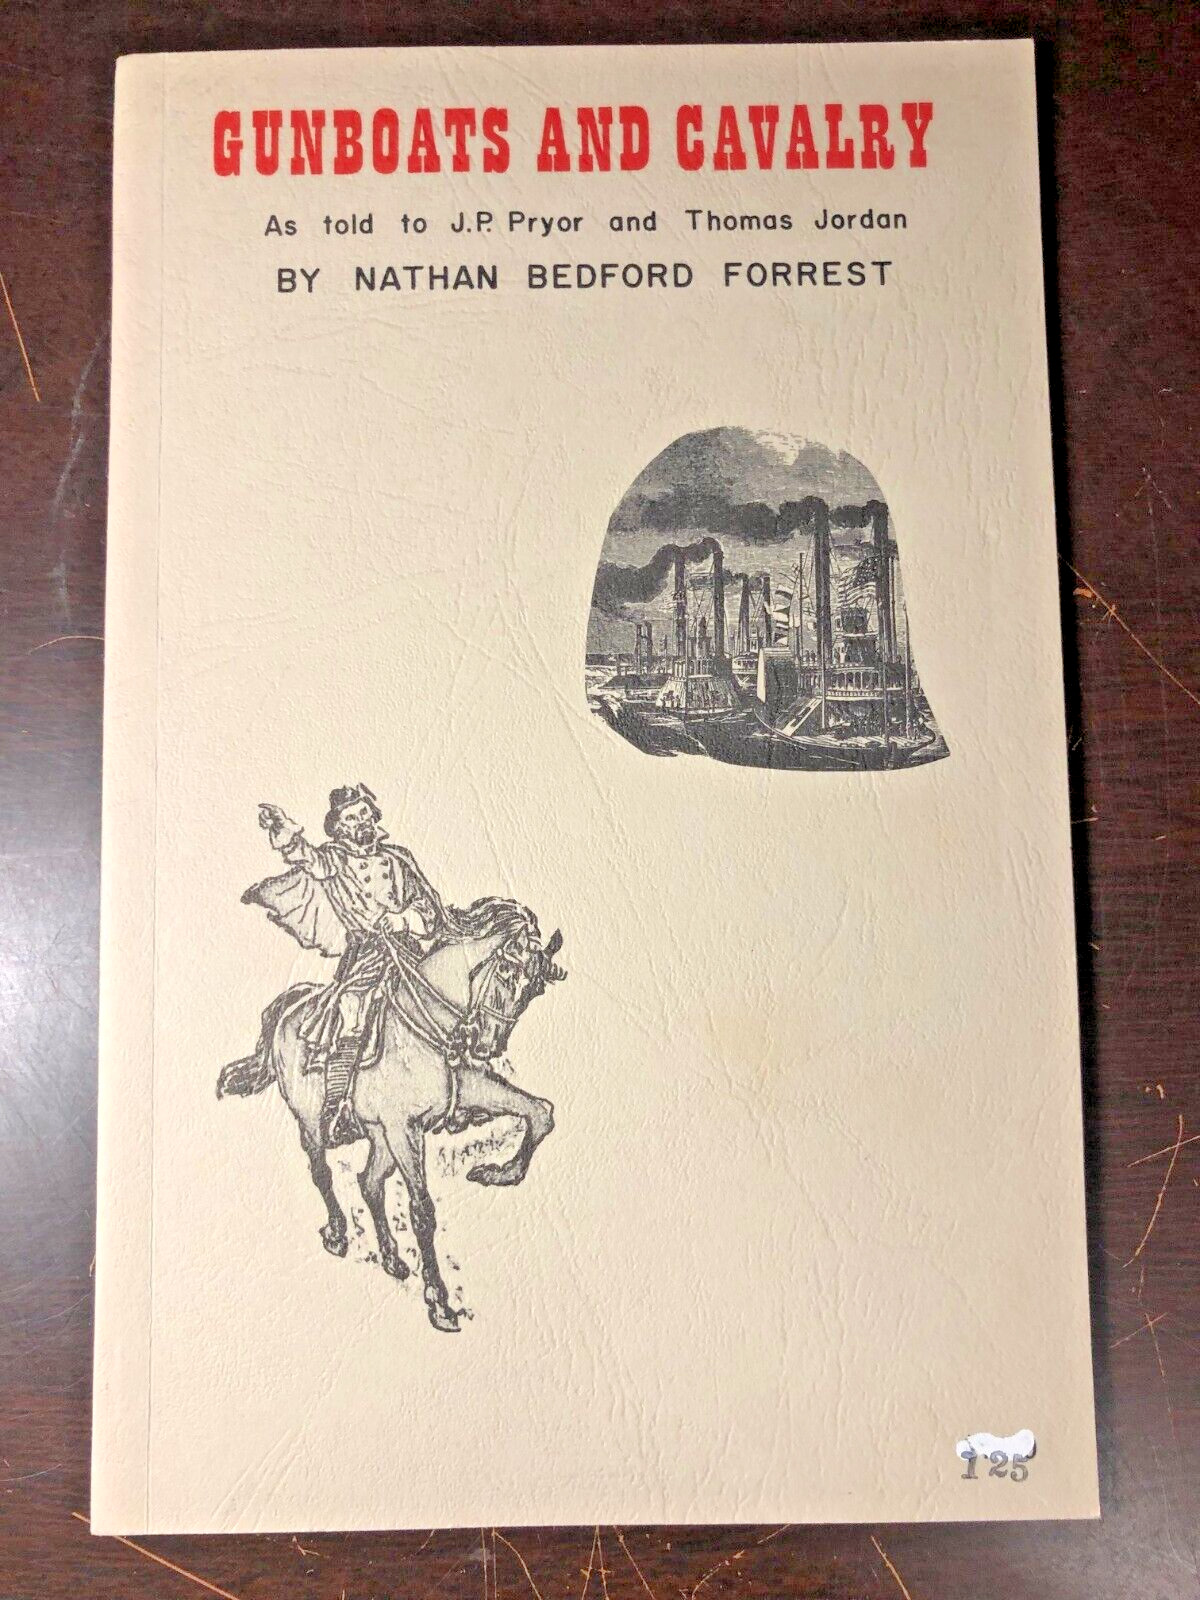 Vintage GUNBOATS AND CAVALRY - NATHAN BEDFORD FORREST